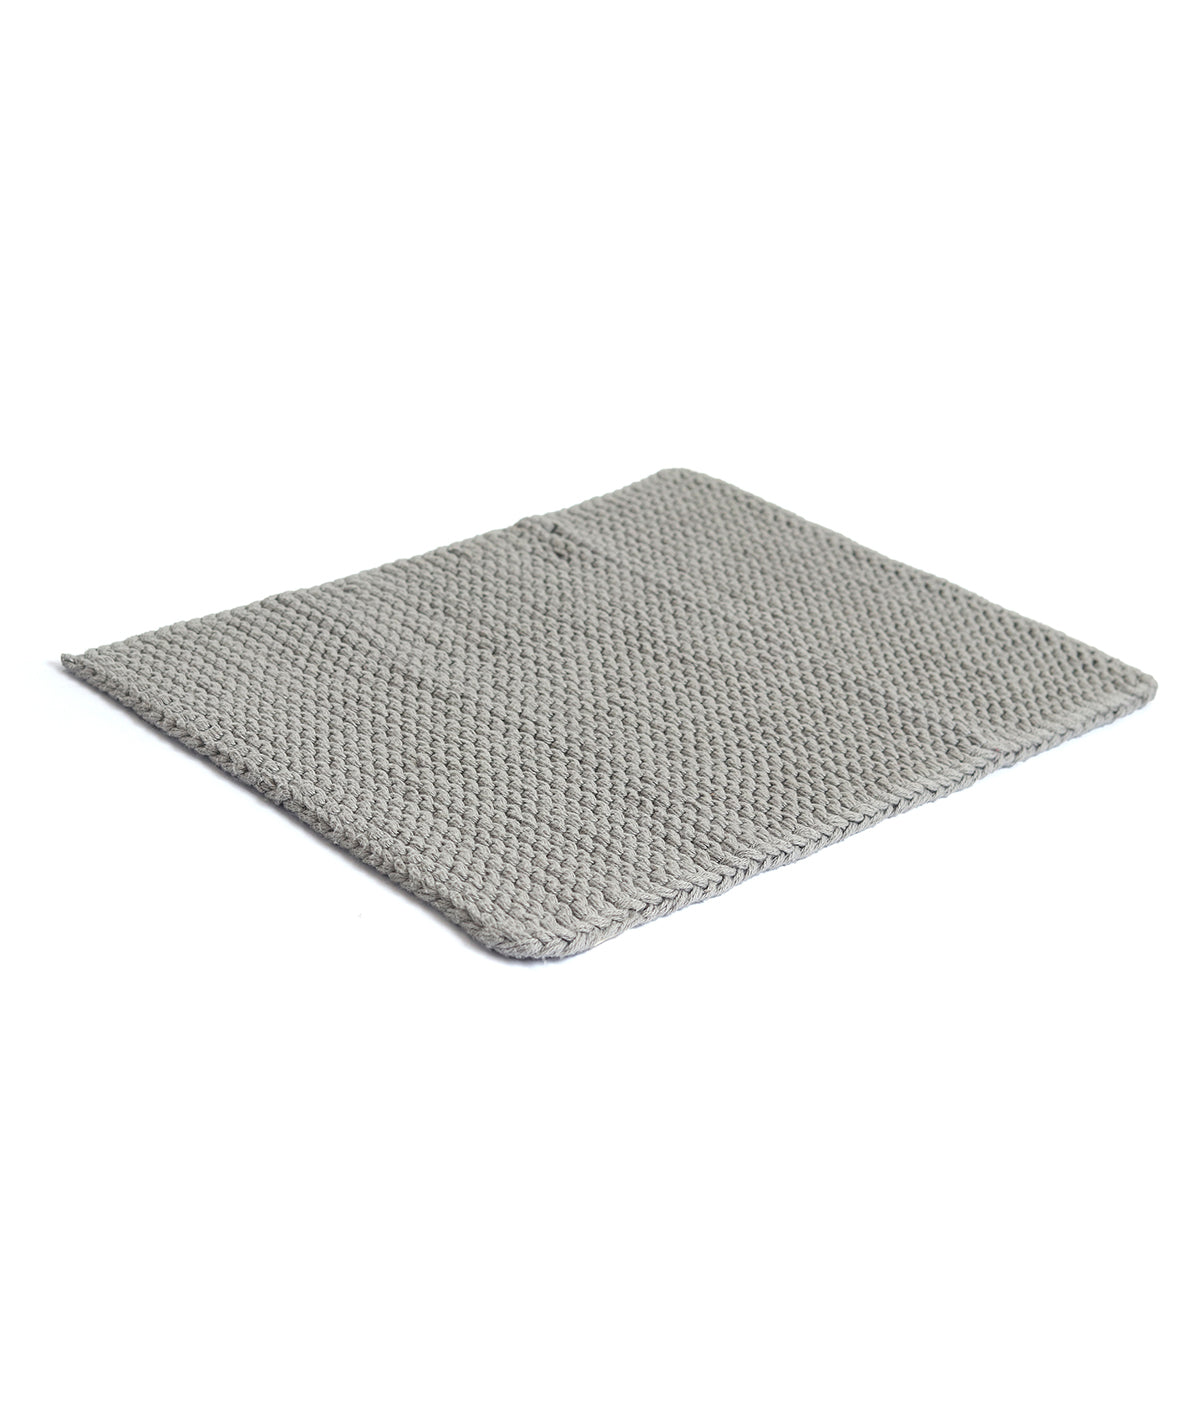 Placemat Cotton Knitted Light Grey Color 12 x 18 Inches Table Placemat (Multi Purpose)  Set of 2 pcs